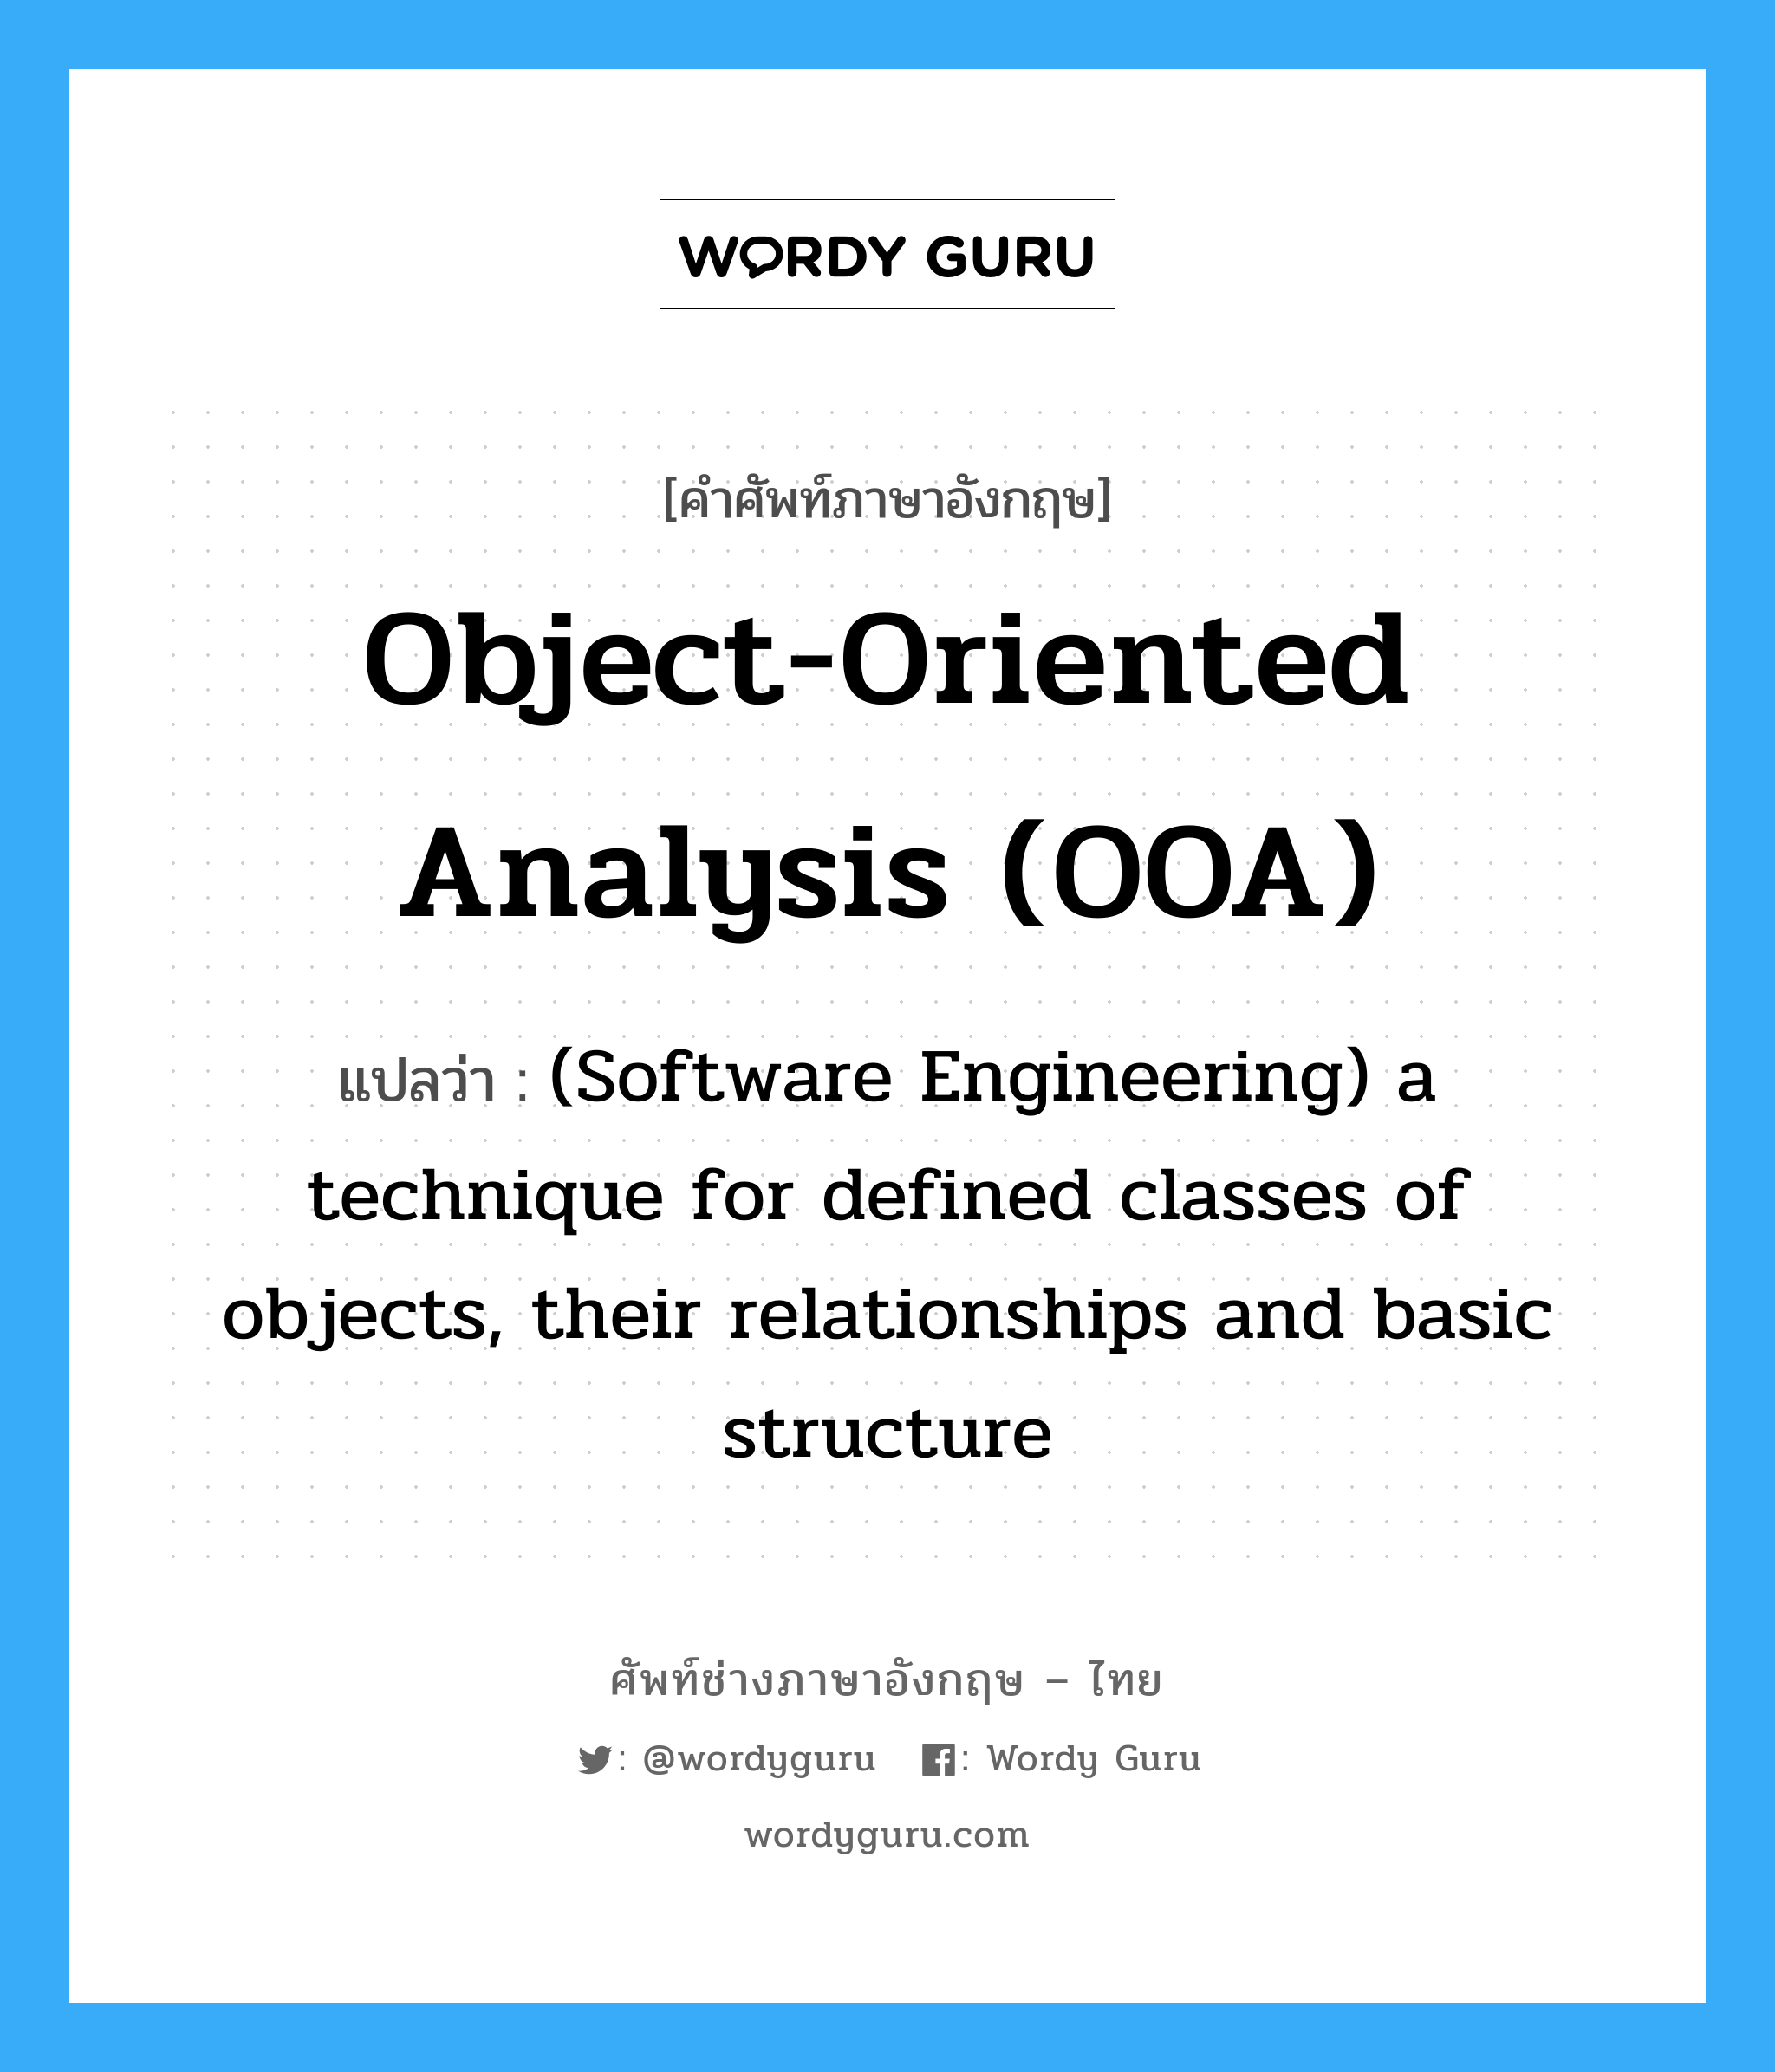 (Software Engineering) a technique for defined classes of objects, their relationships and basic structure ภาษาอังกฤษ?, คำศัพท์ช่างภาษาอังกฤษ - ไทย (Software Engineering) a technique for defined classes of objects, their relationships and basic structure คำศัพท์ภาษาอังกฤษ (Software Engineering) a technique for defined classes of objects, their relationships and basic structure แปลว่า Object-oriented analysis (OOA)